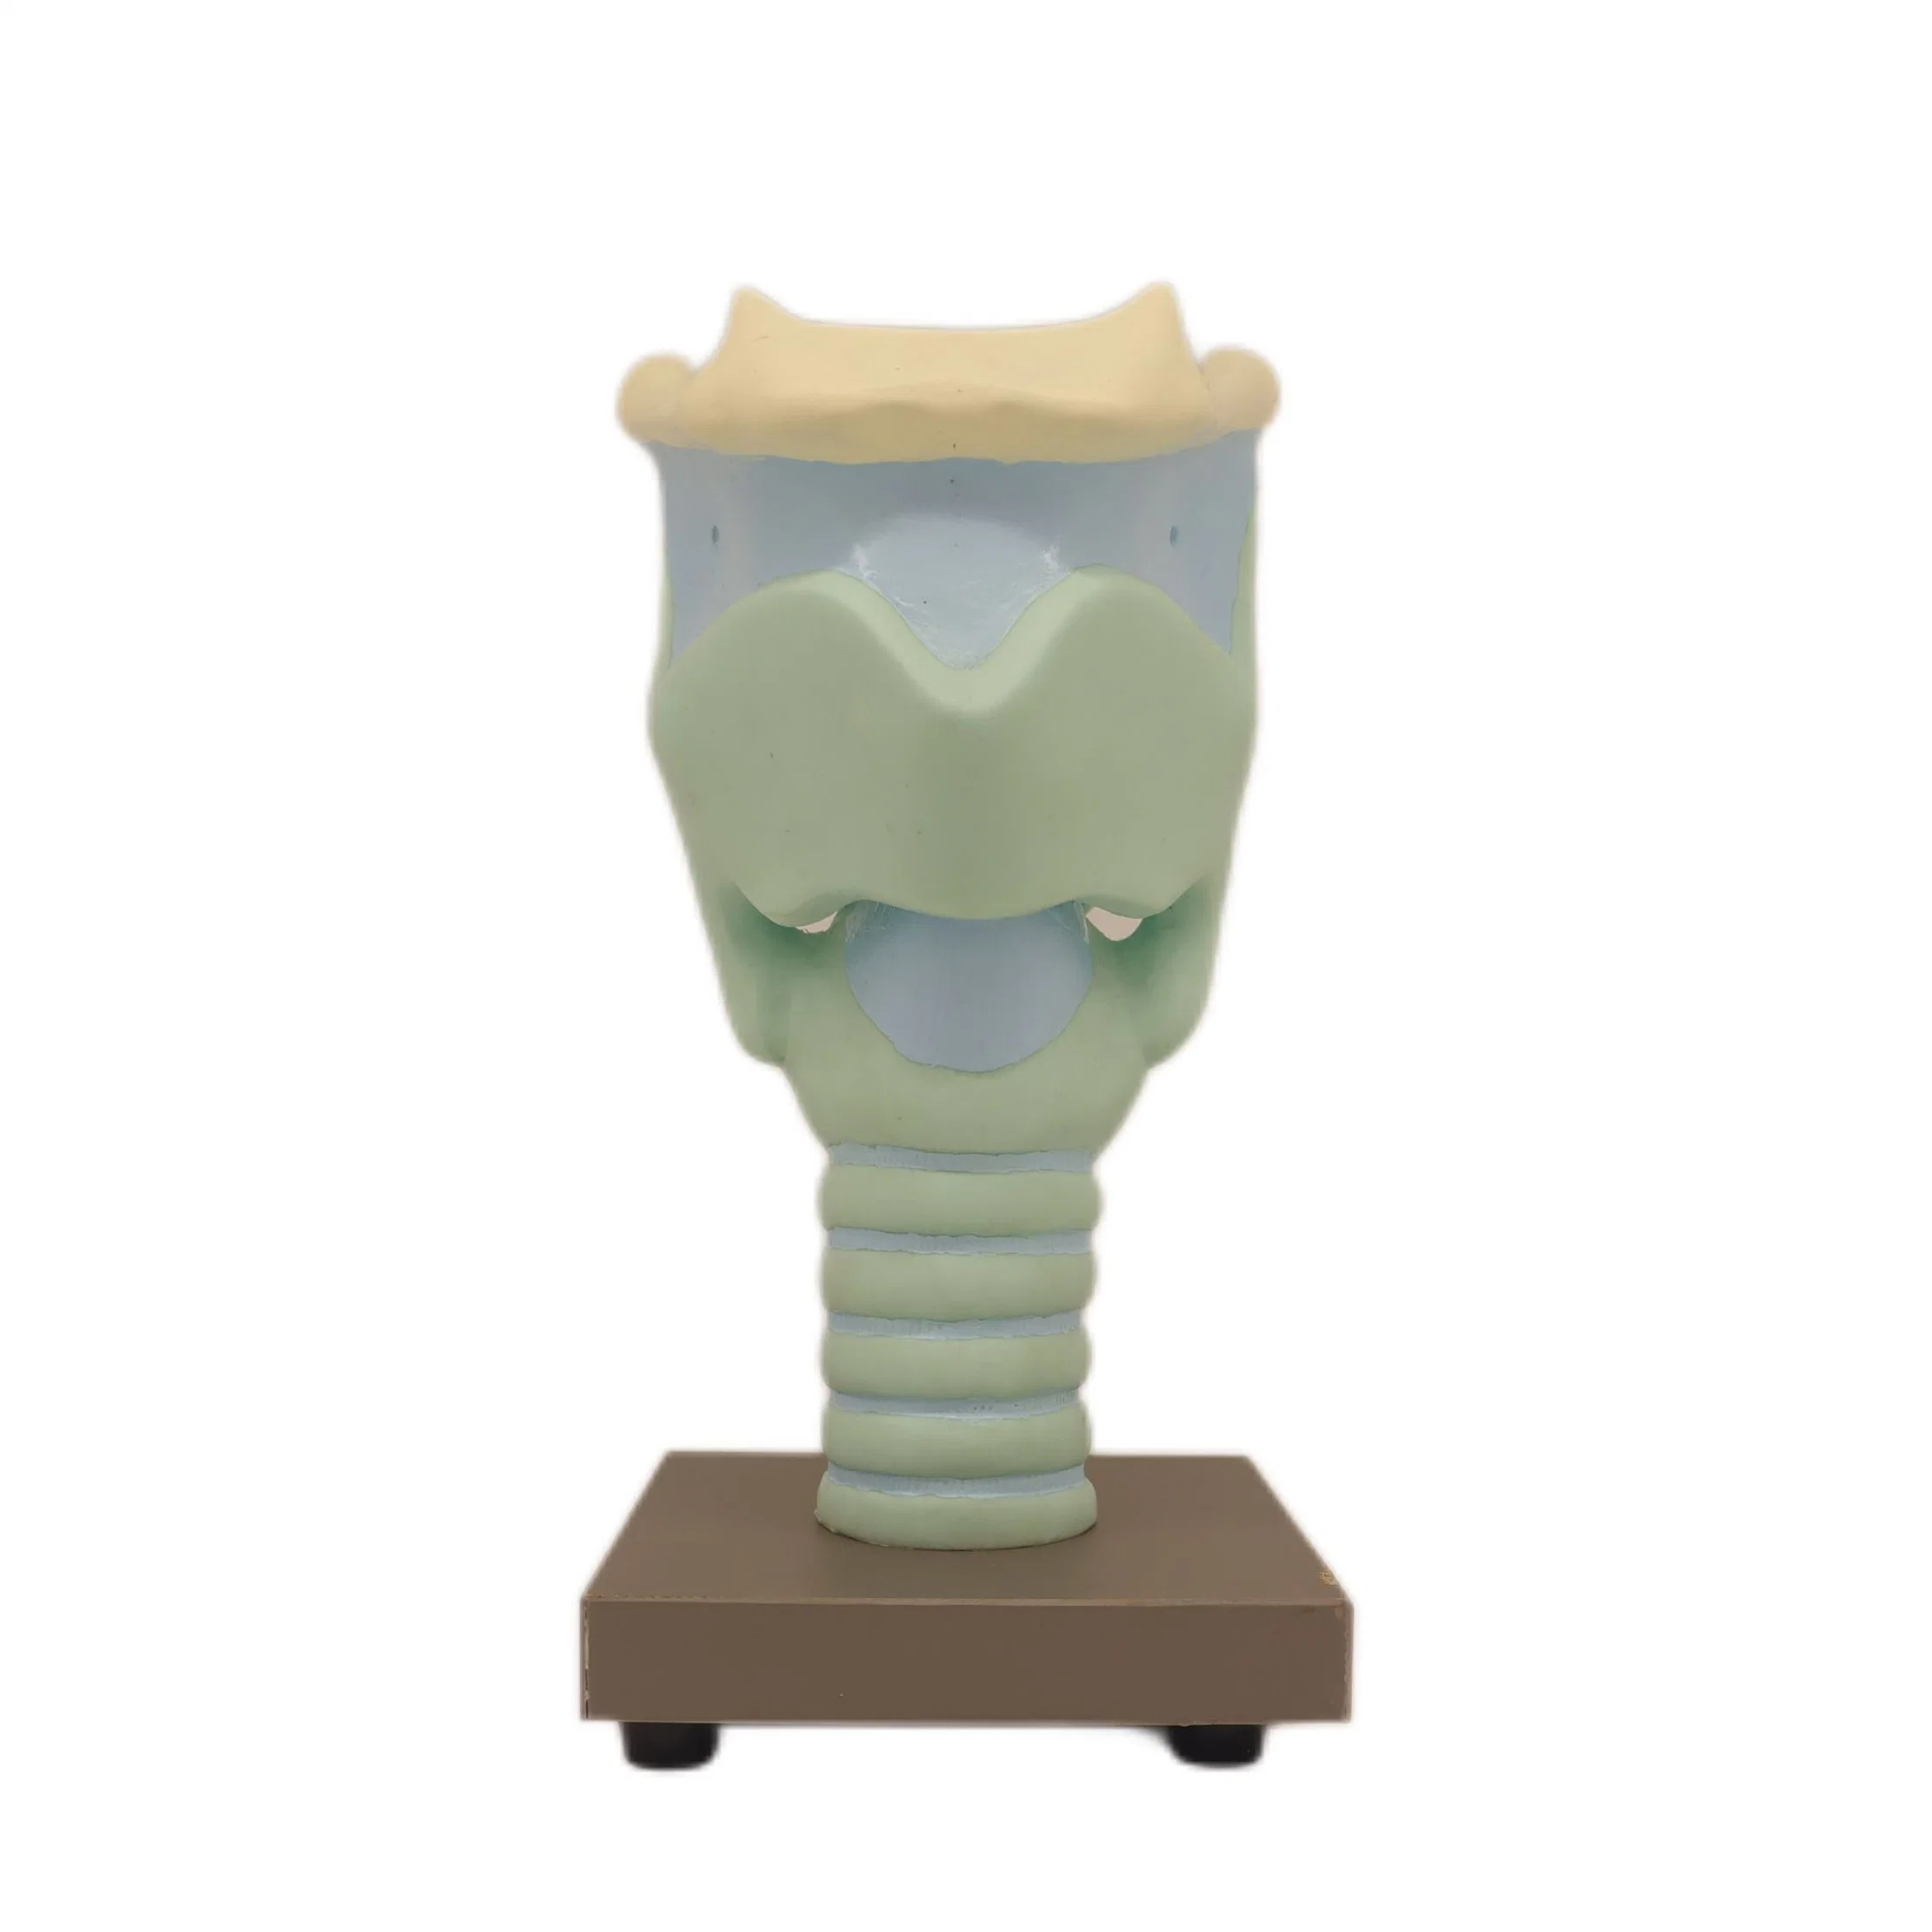 Good Quality of Medical Teaching Anatomical Expansion Model of The Cartilages of Larynx